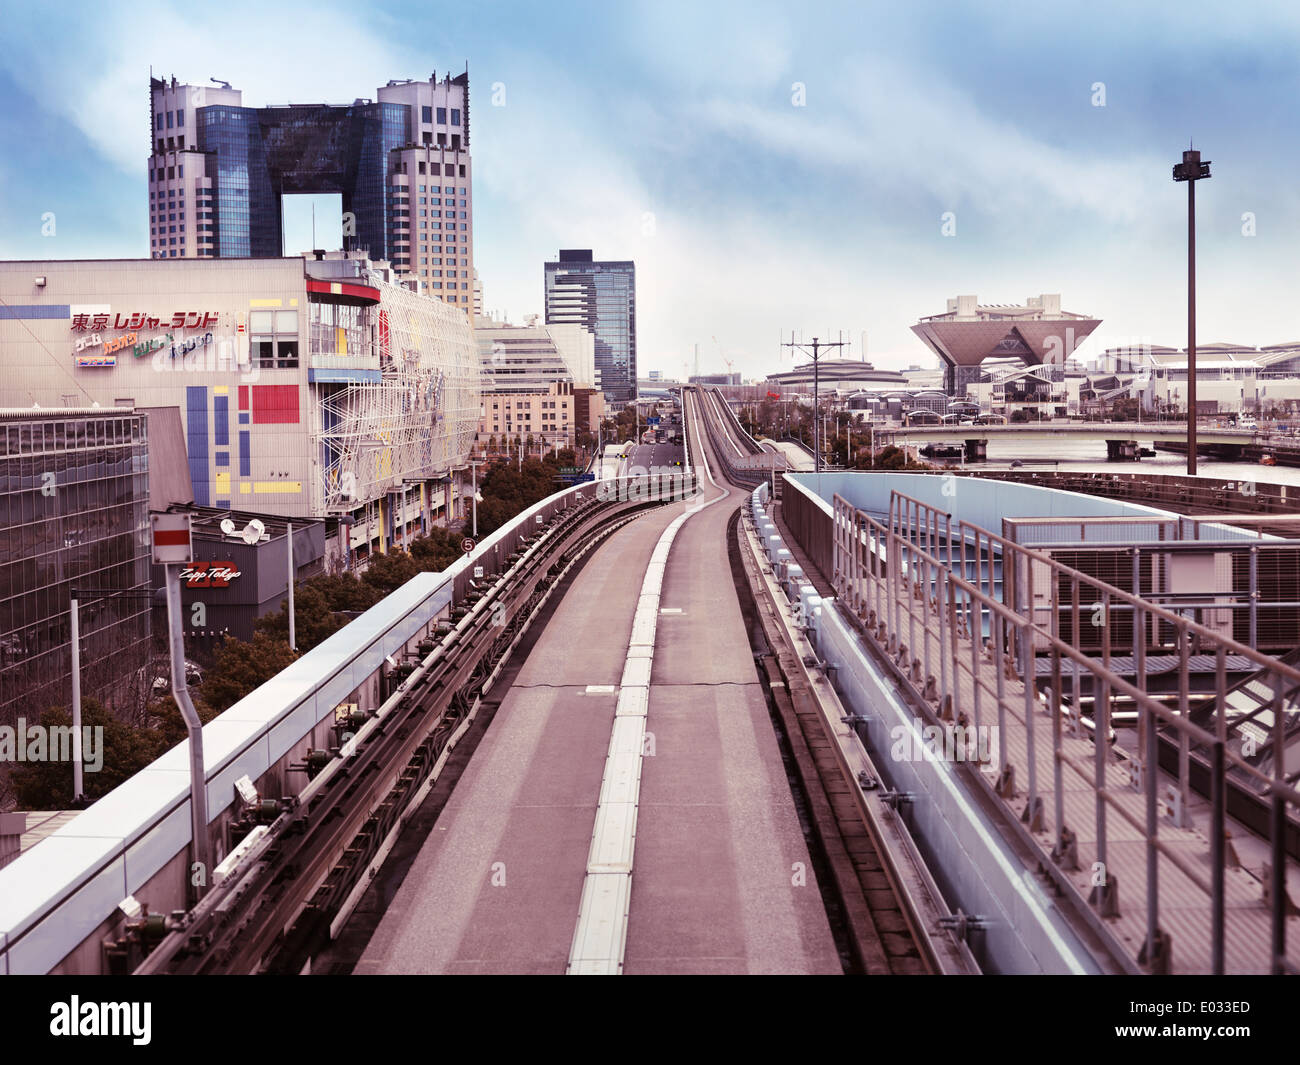 New Transit Yurikamome line going through Odaiba, Tokyo, Japan. Tokyo Big Sight and Telecom Center in the background. Stock Photo